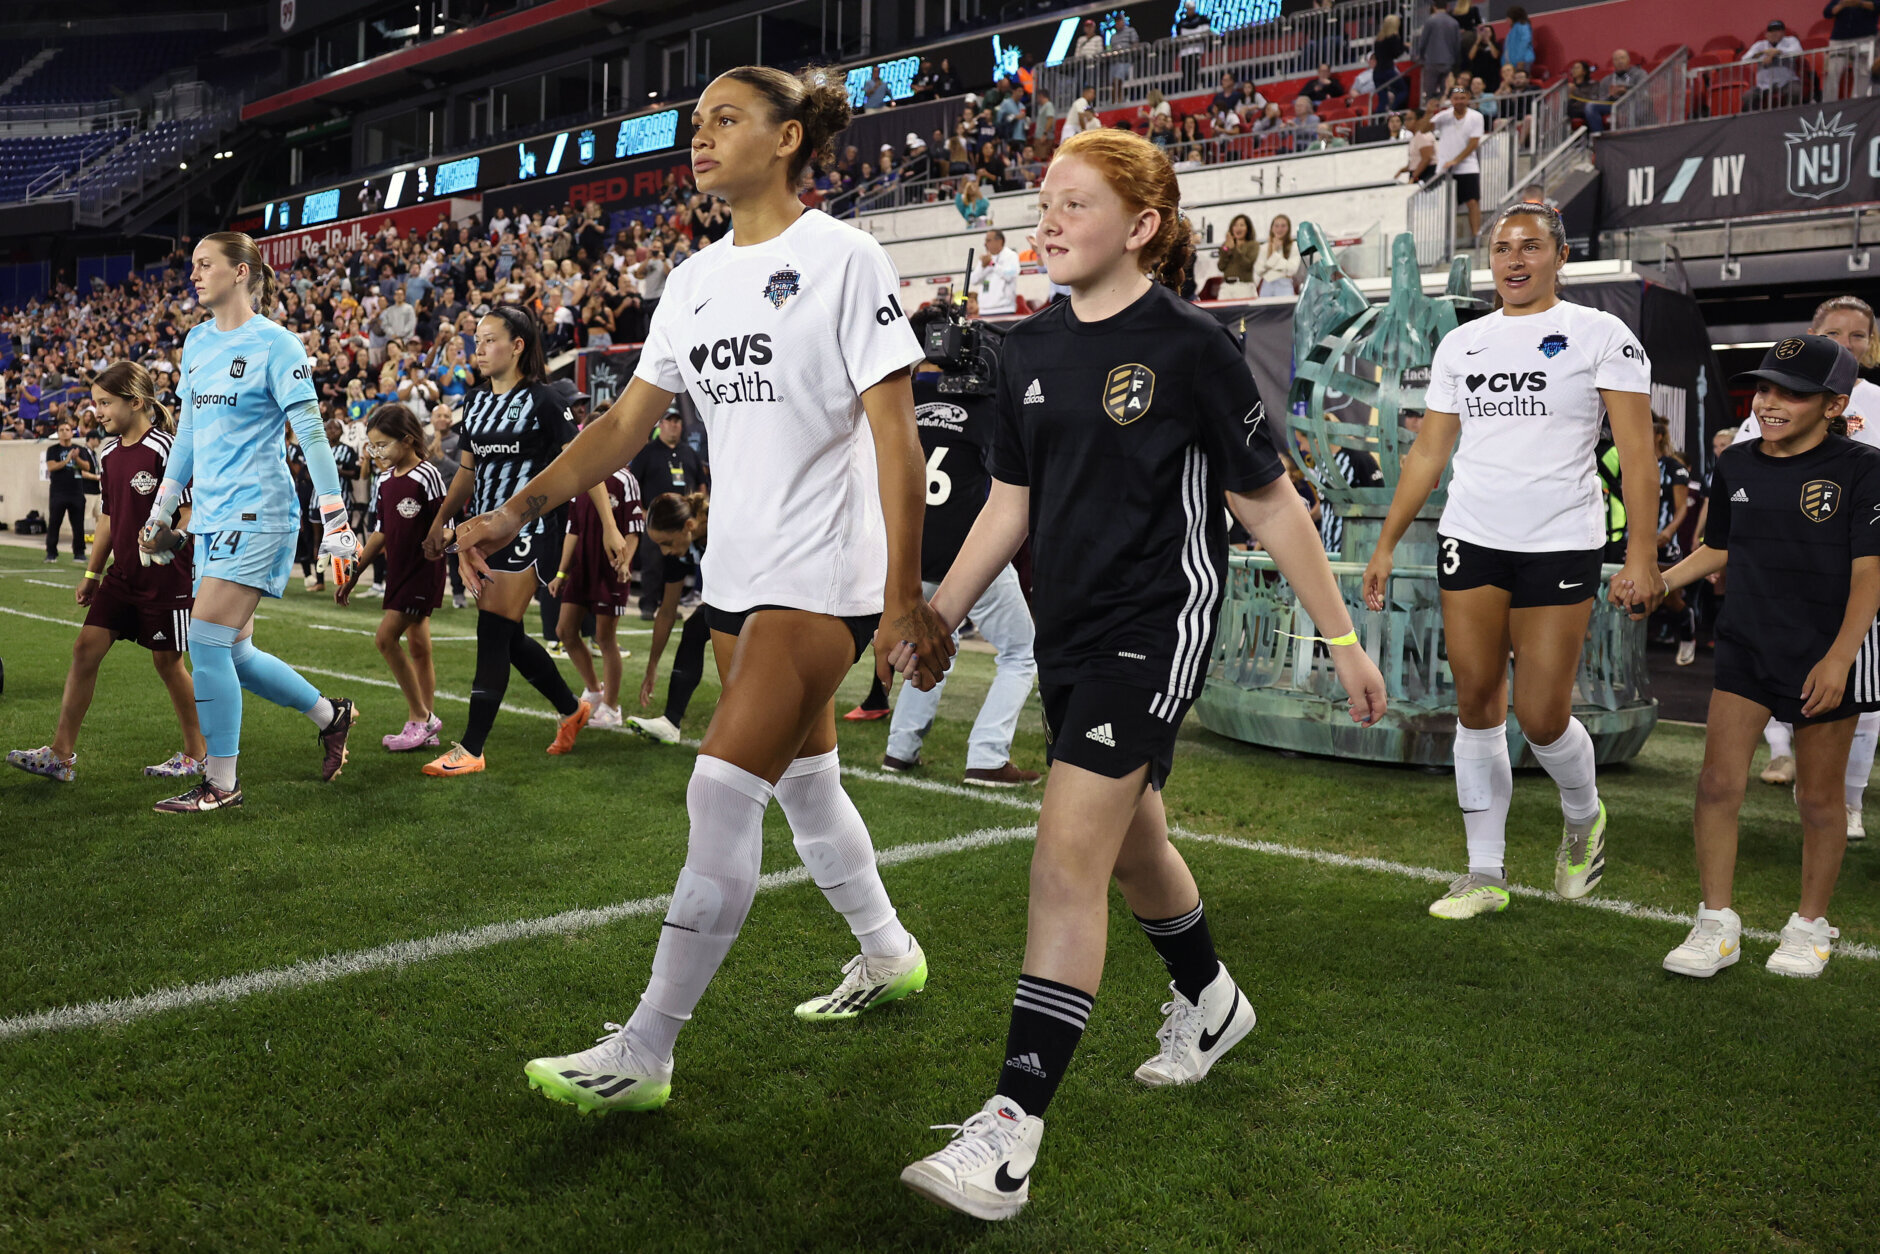 Trinity Rodman, daughter of an NBA legend, shines for USWNT before